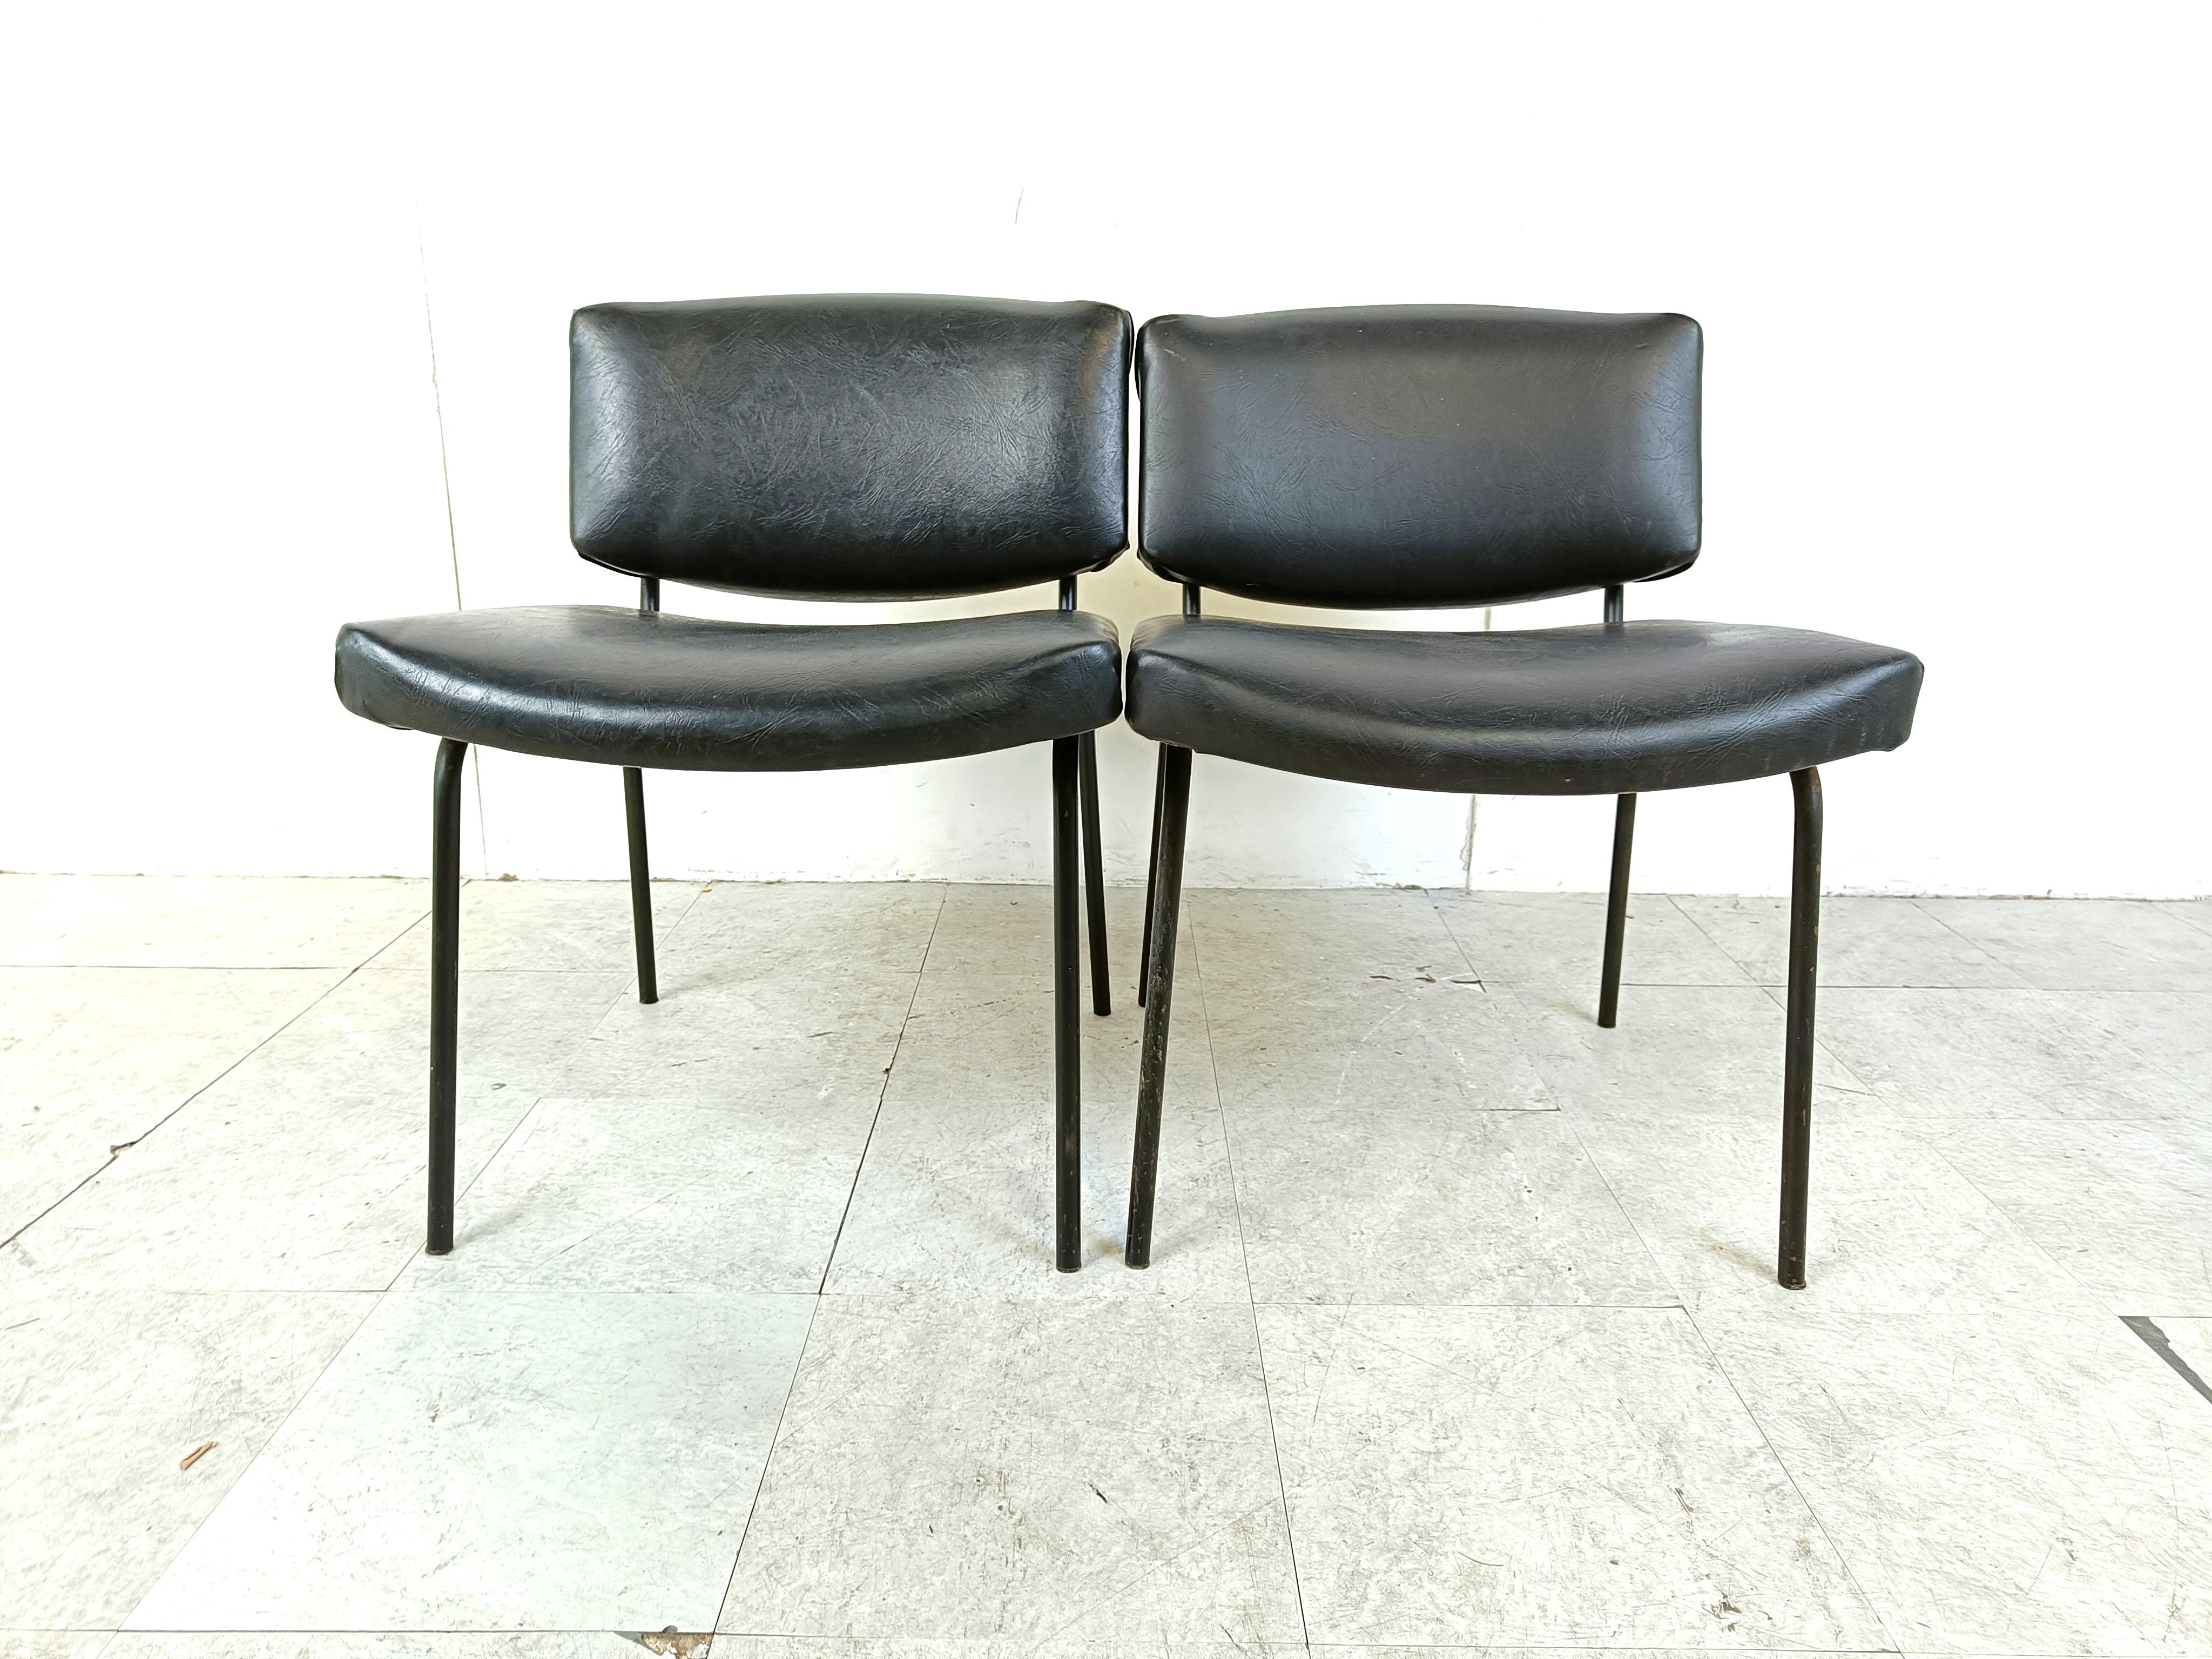 Faux Leather Vintage Conseil Chairs by Pierre Guariche 1950's, France For Sale